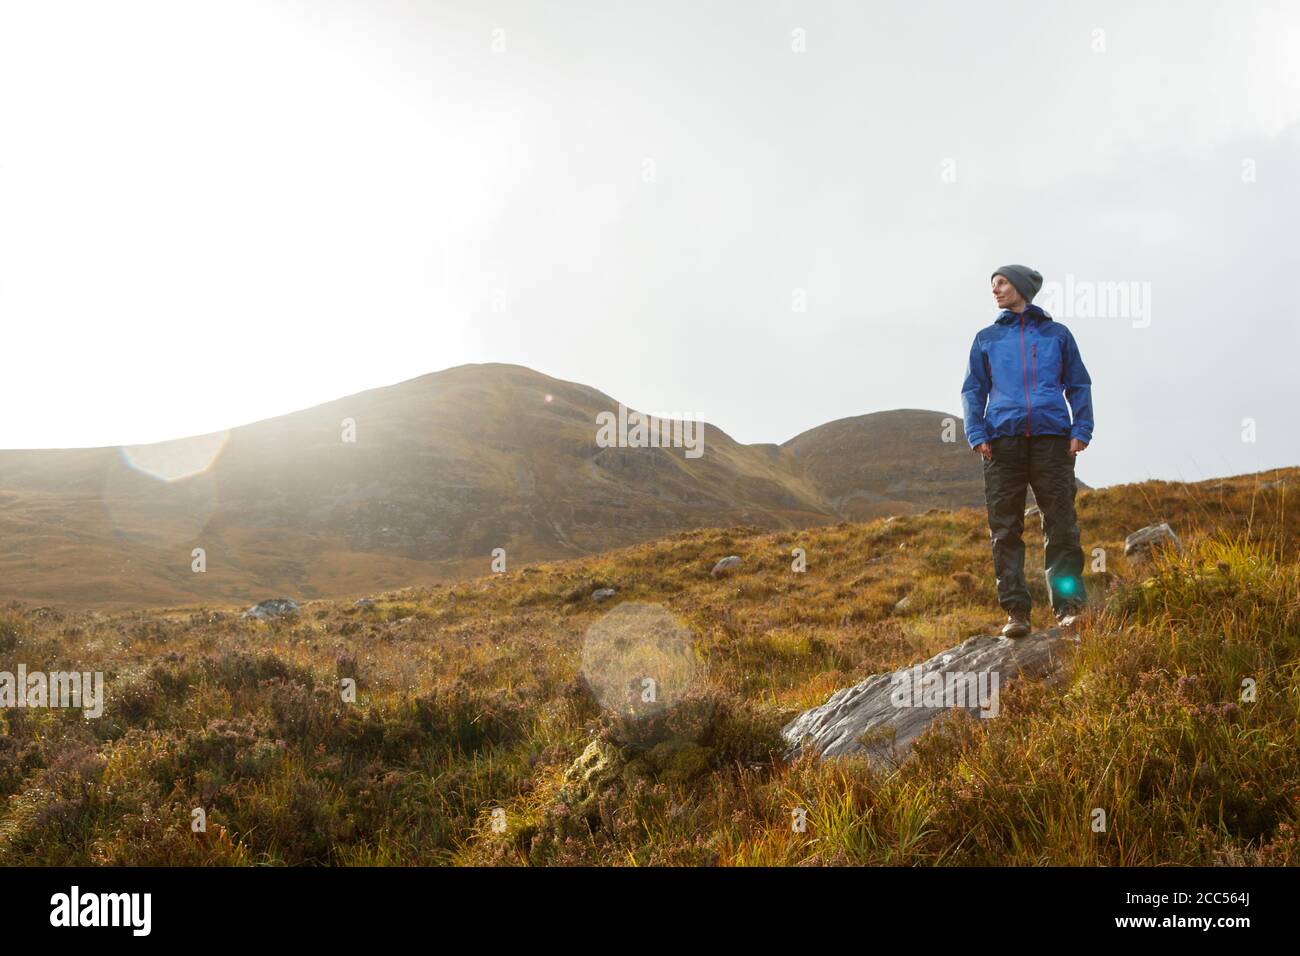 A person walking in Scottish countryside near the Allt Coire Rooill river in Torridon, Scotland Stock Photo